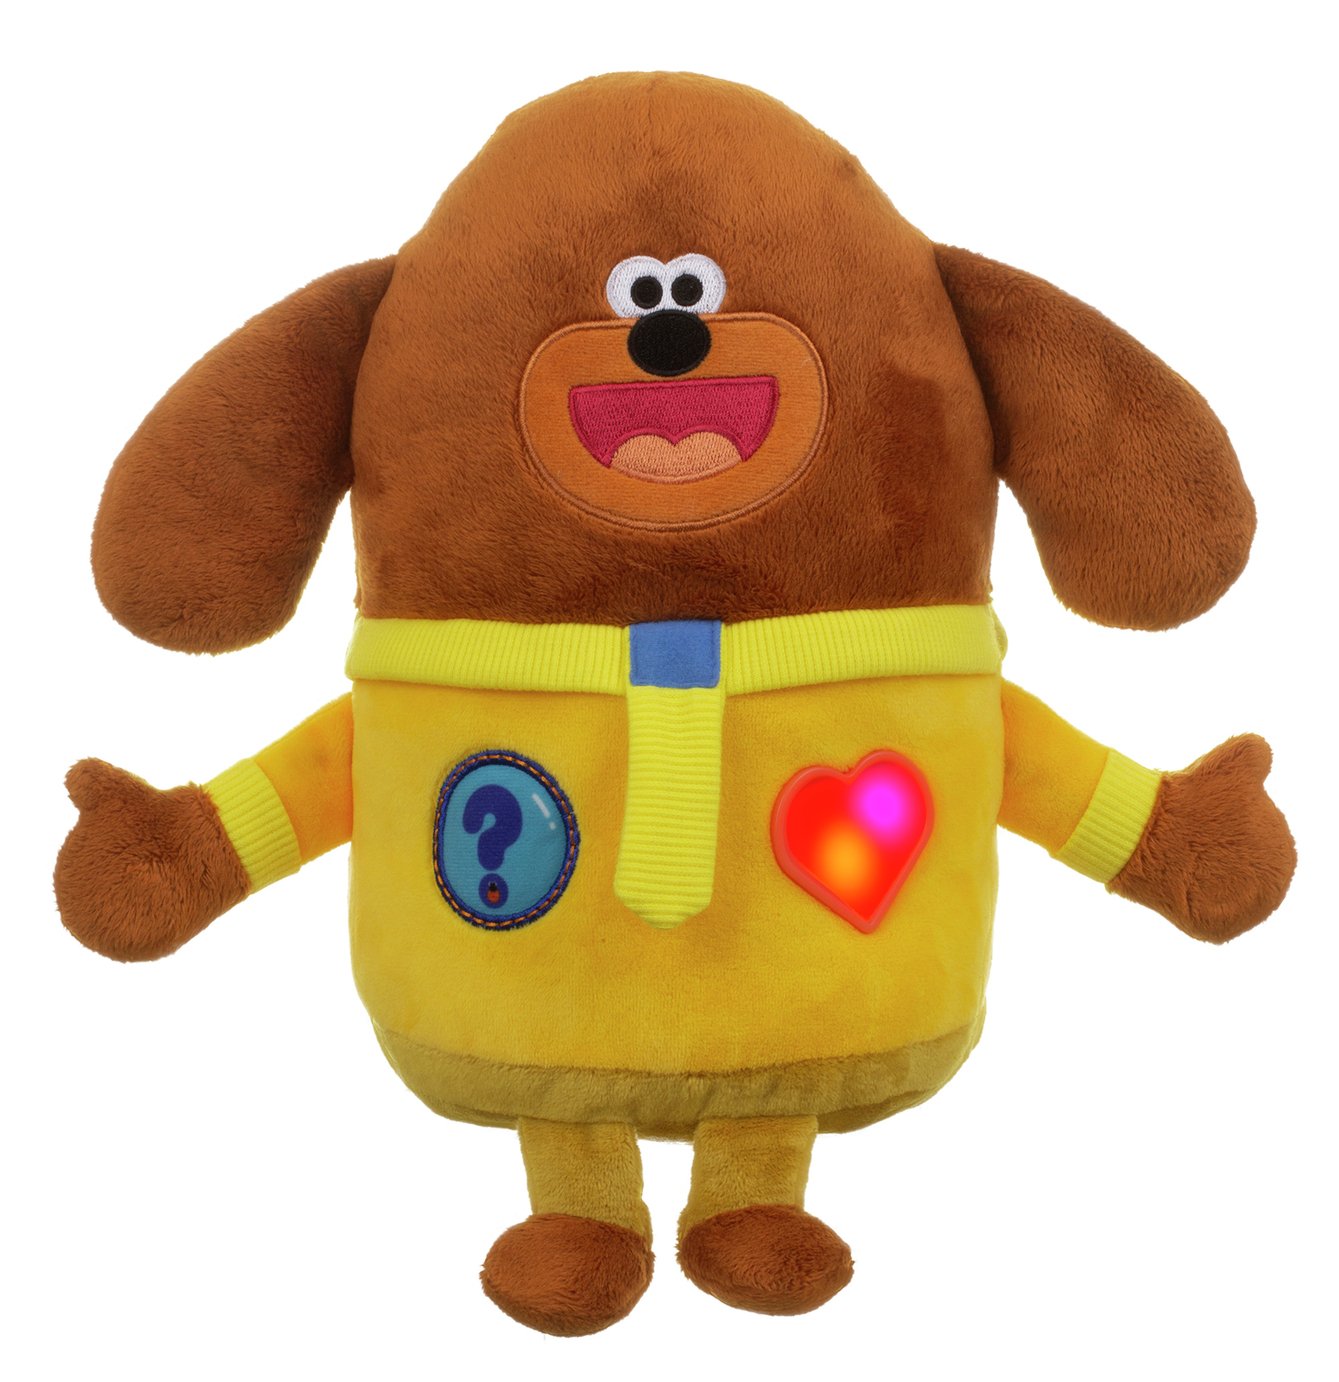 hey duggee musical toy